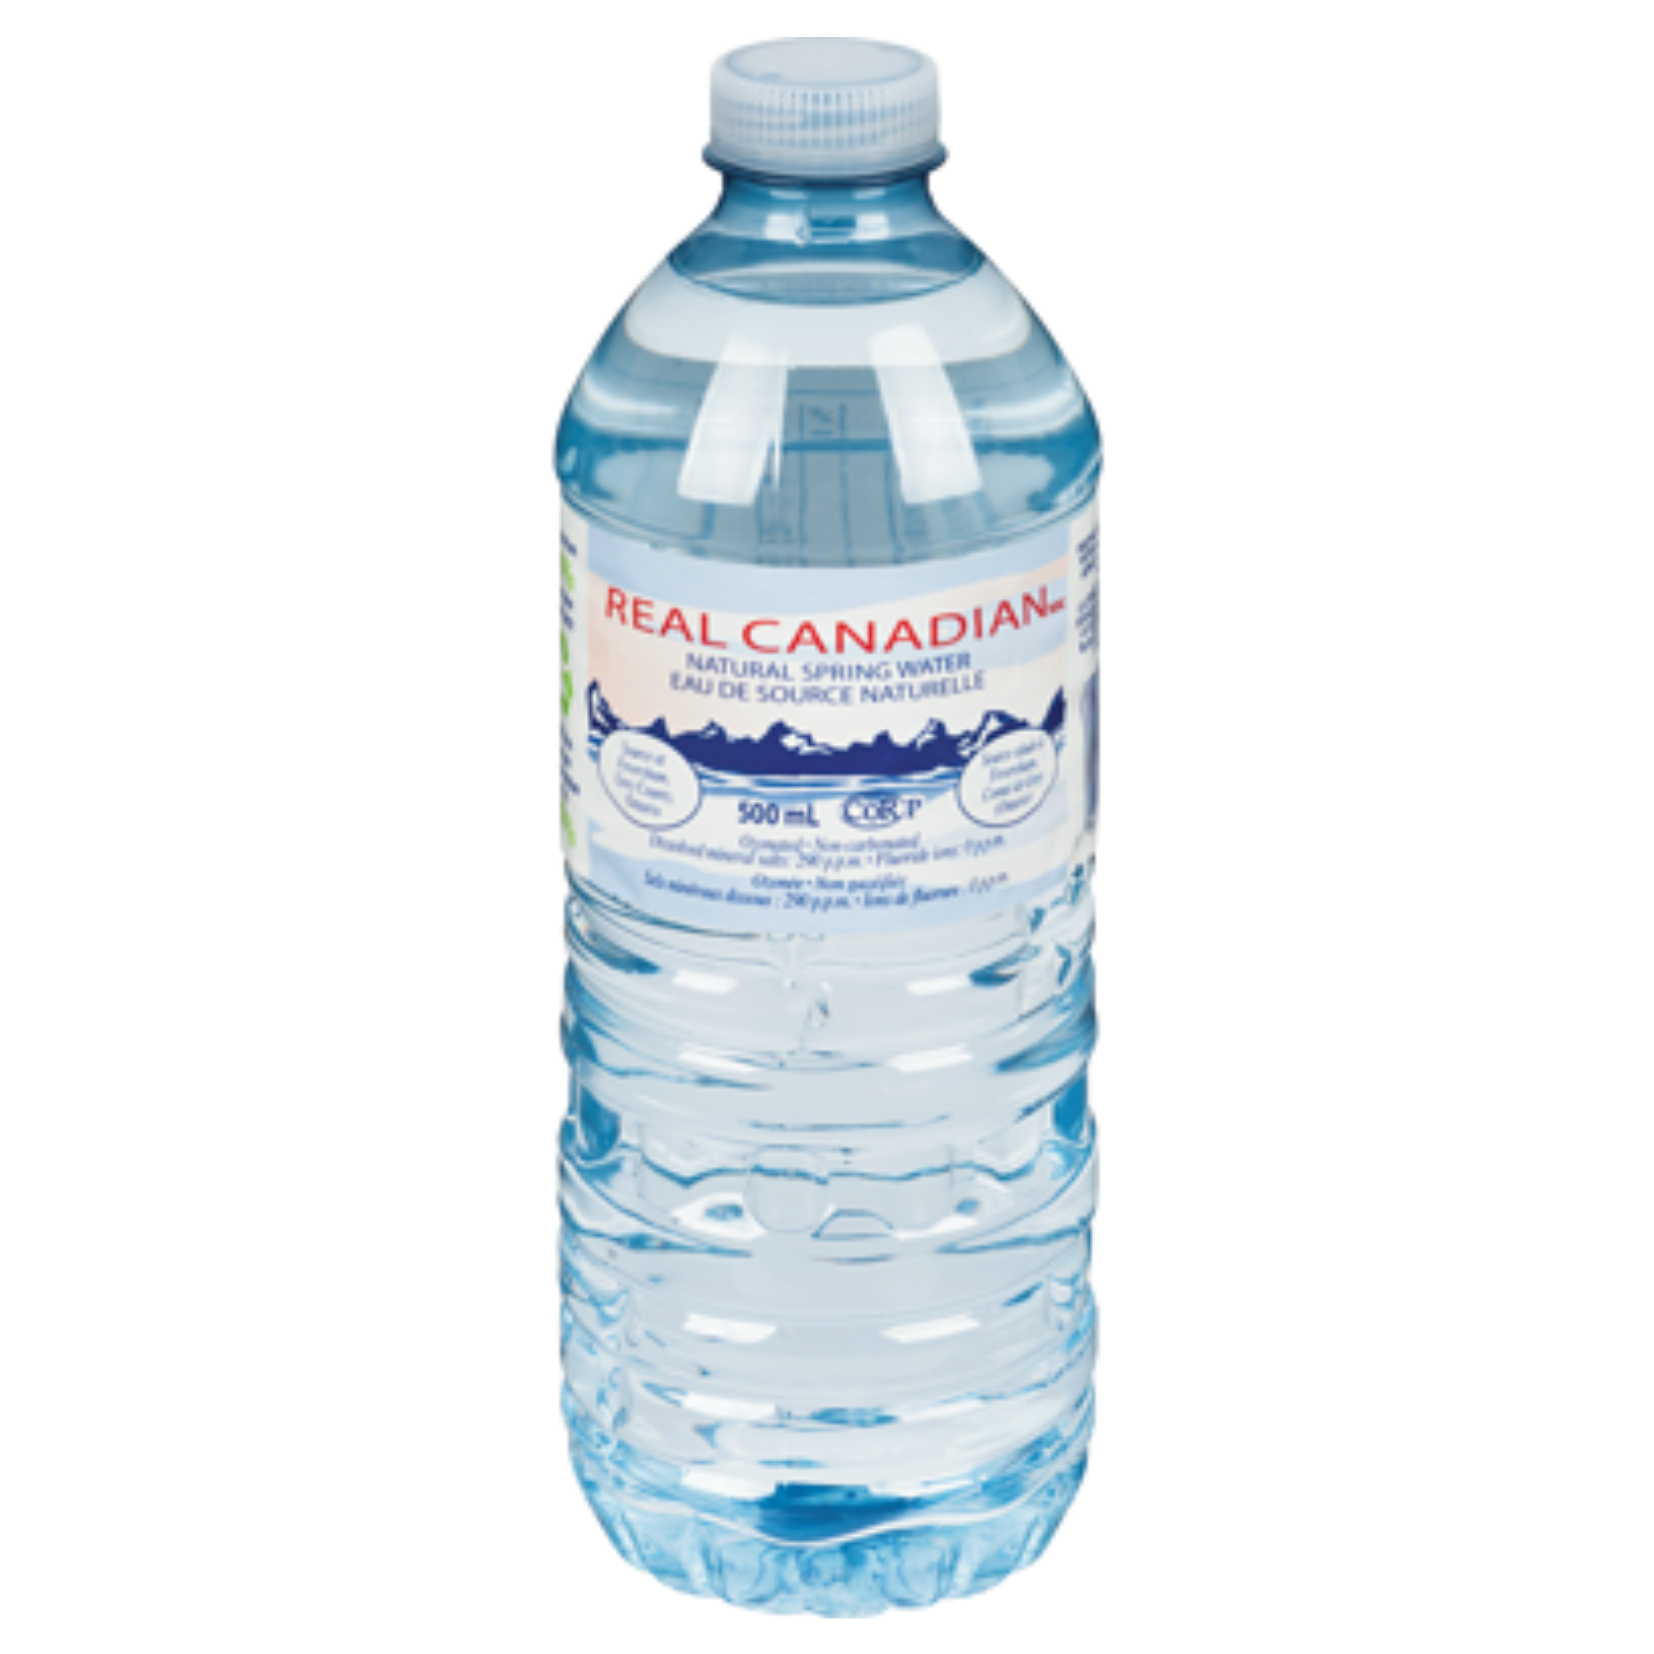 Real Canadian Spring Water Bottle 500ml